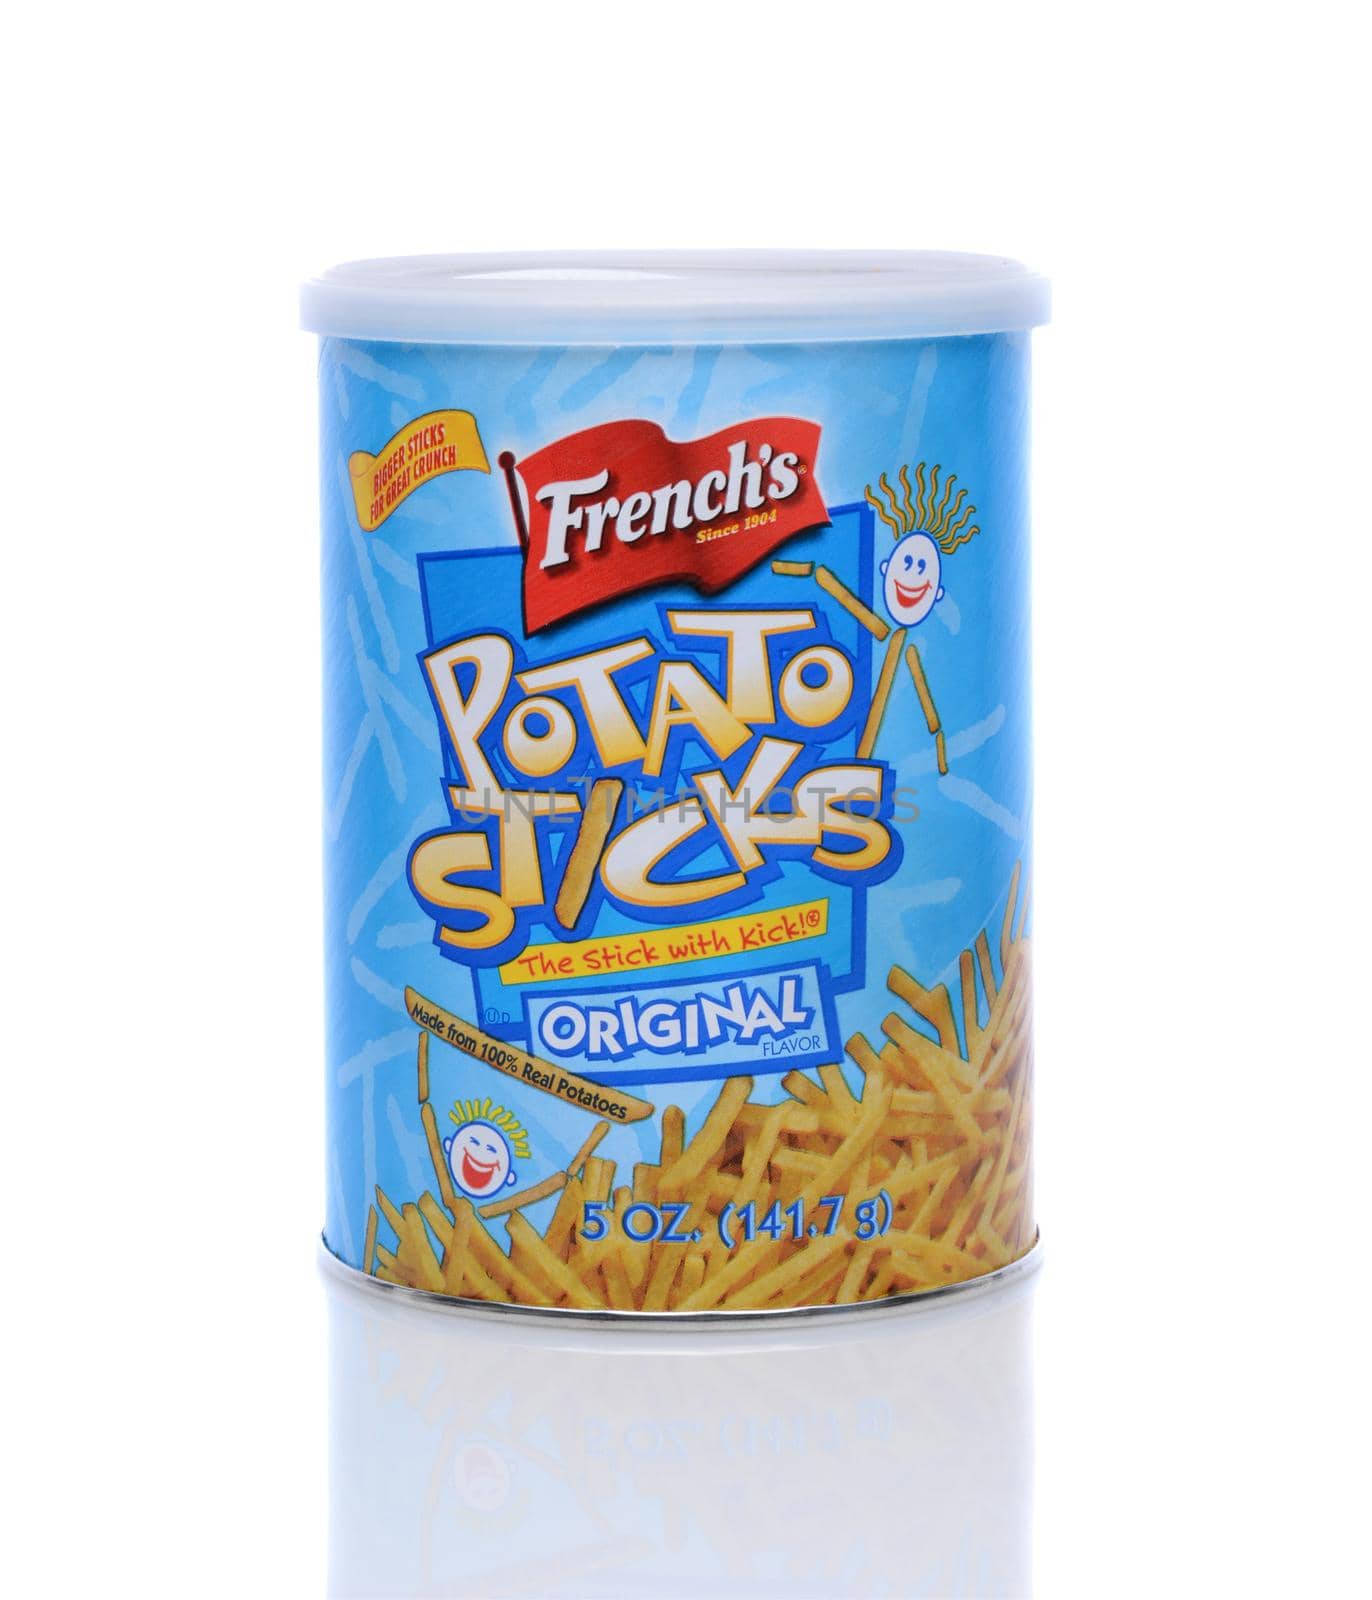 IRVINE, CA - May 14, 2014: A 5 ounce can of Frenchs Potato Sticks. A unit of Reckitt Benckiser, Frenchs has been producing Potato Sticks since 1904.